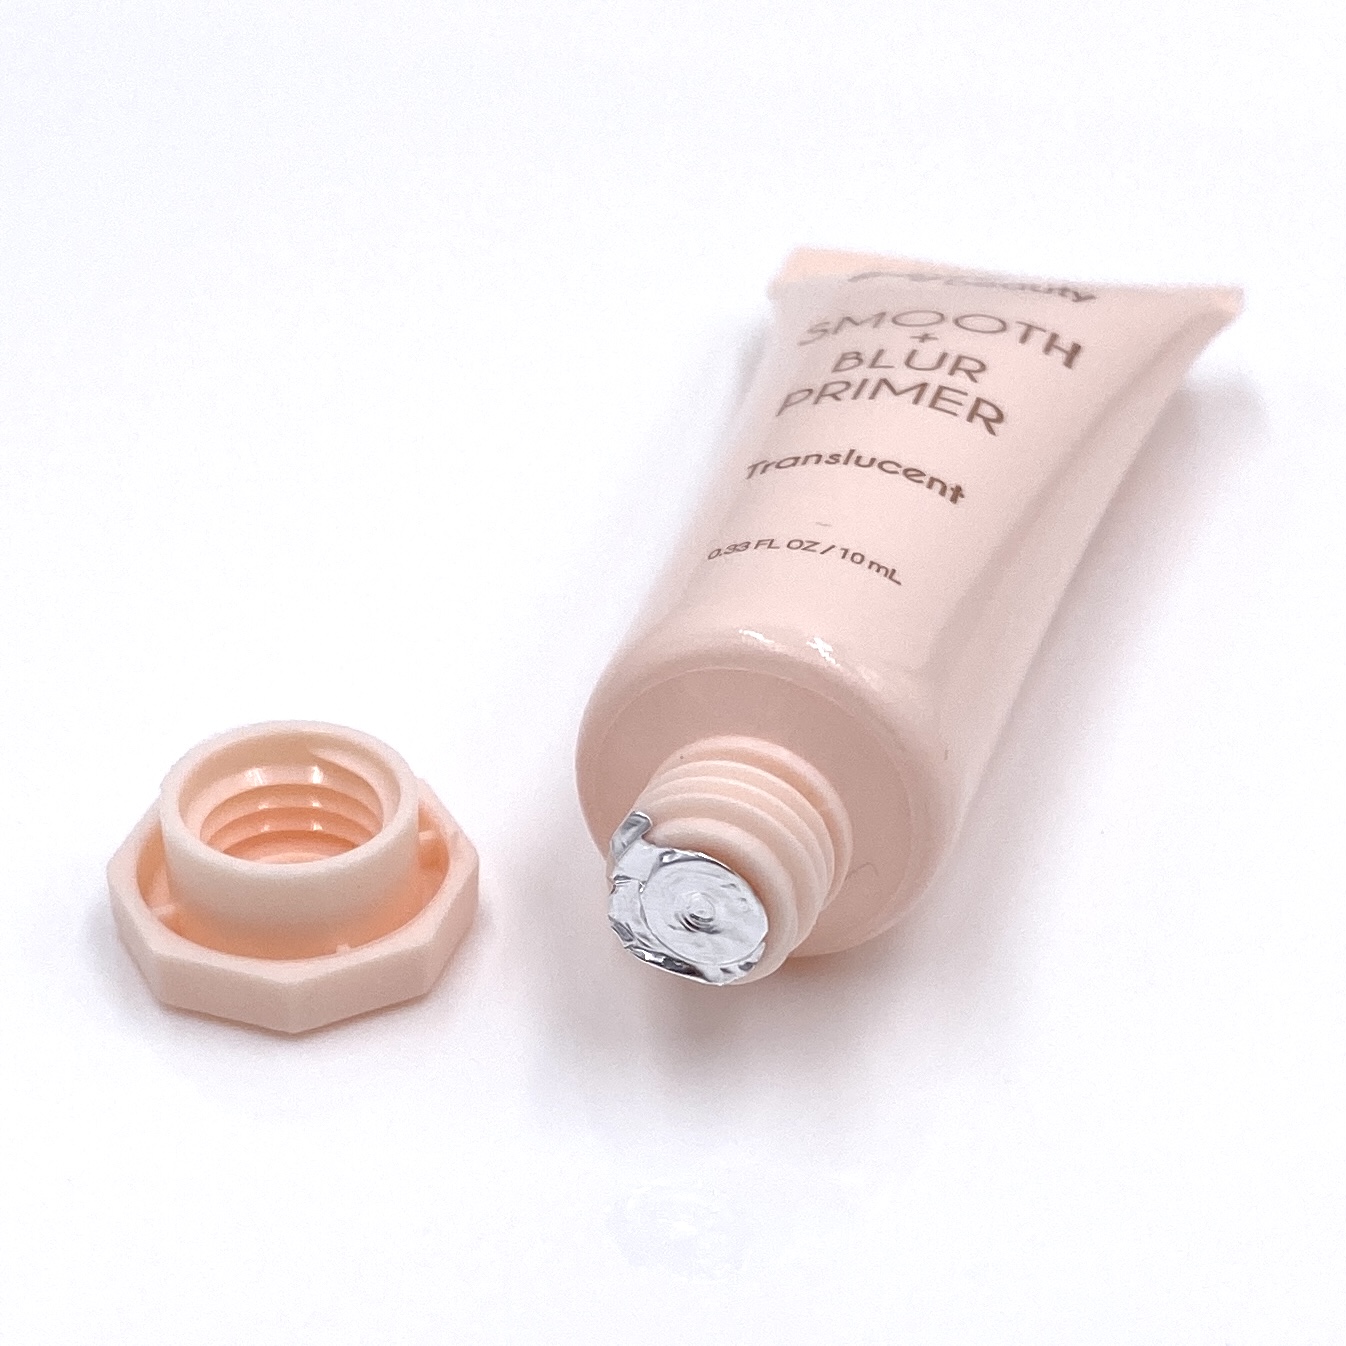 The open bottle for the Basic Beauty Translucent Primer from the Ipsy Glam Bag May 2021.